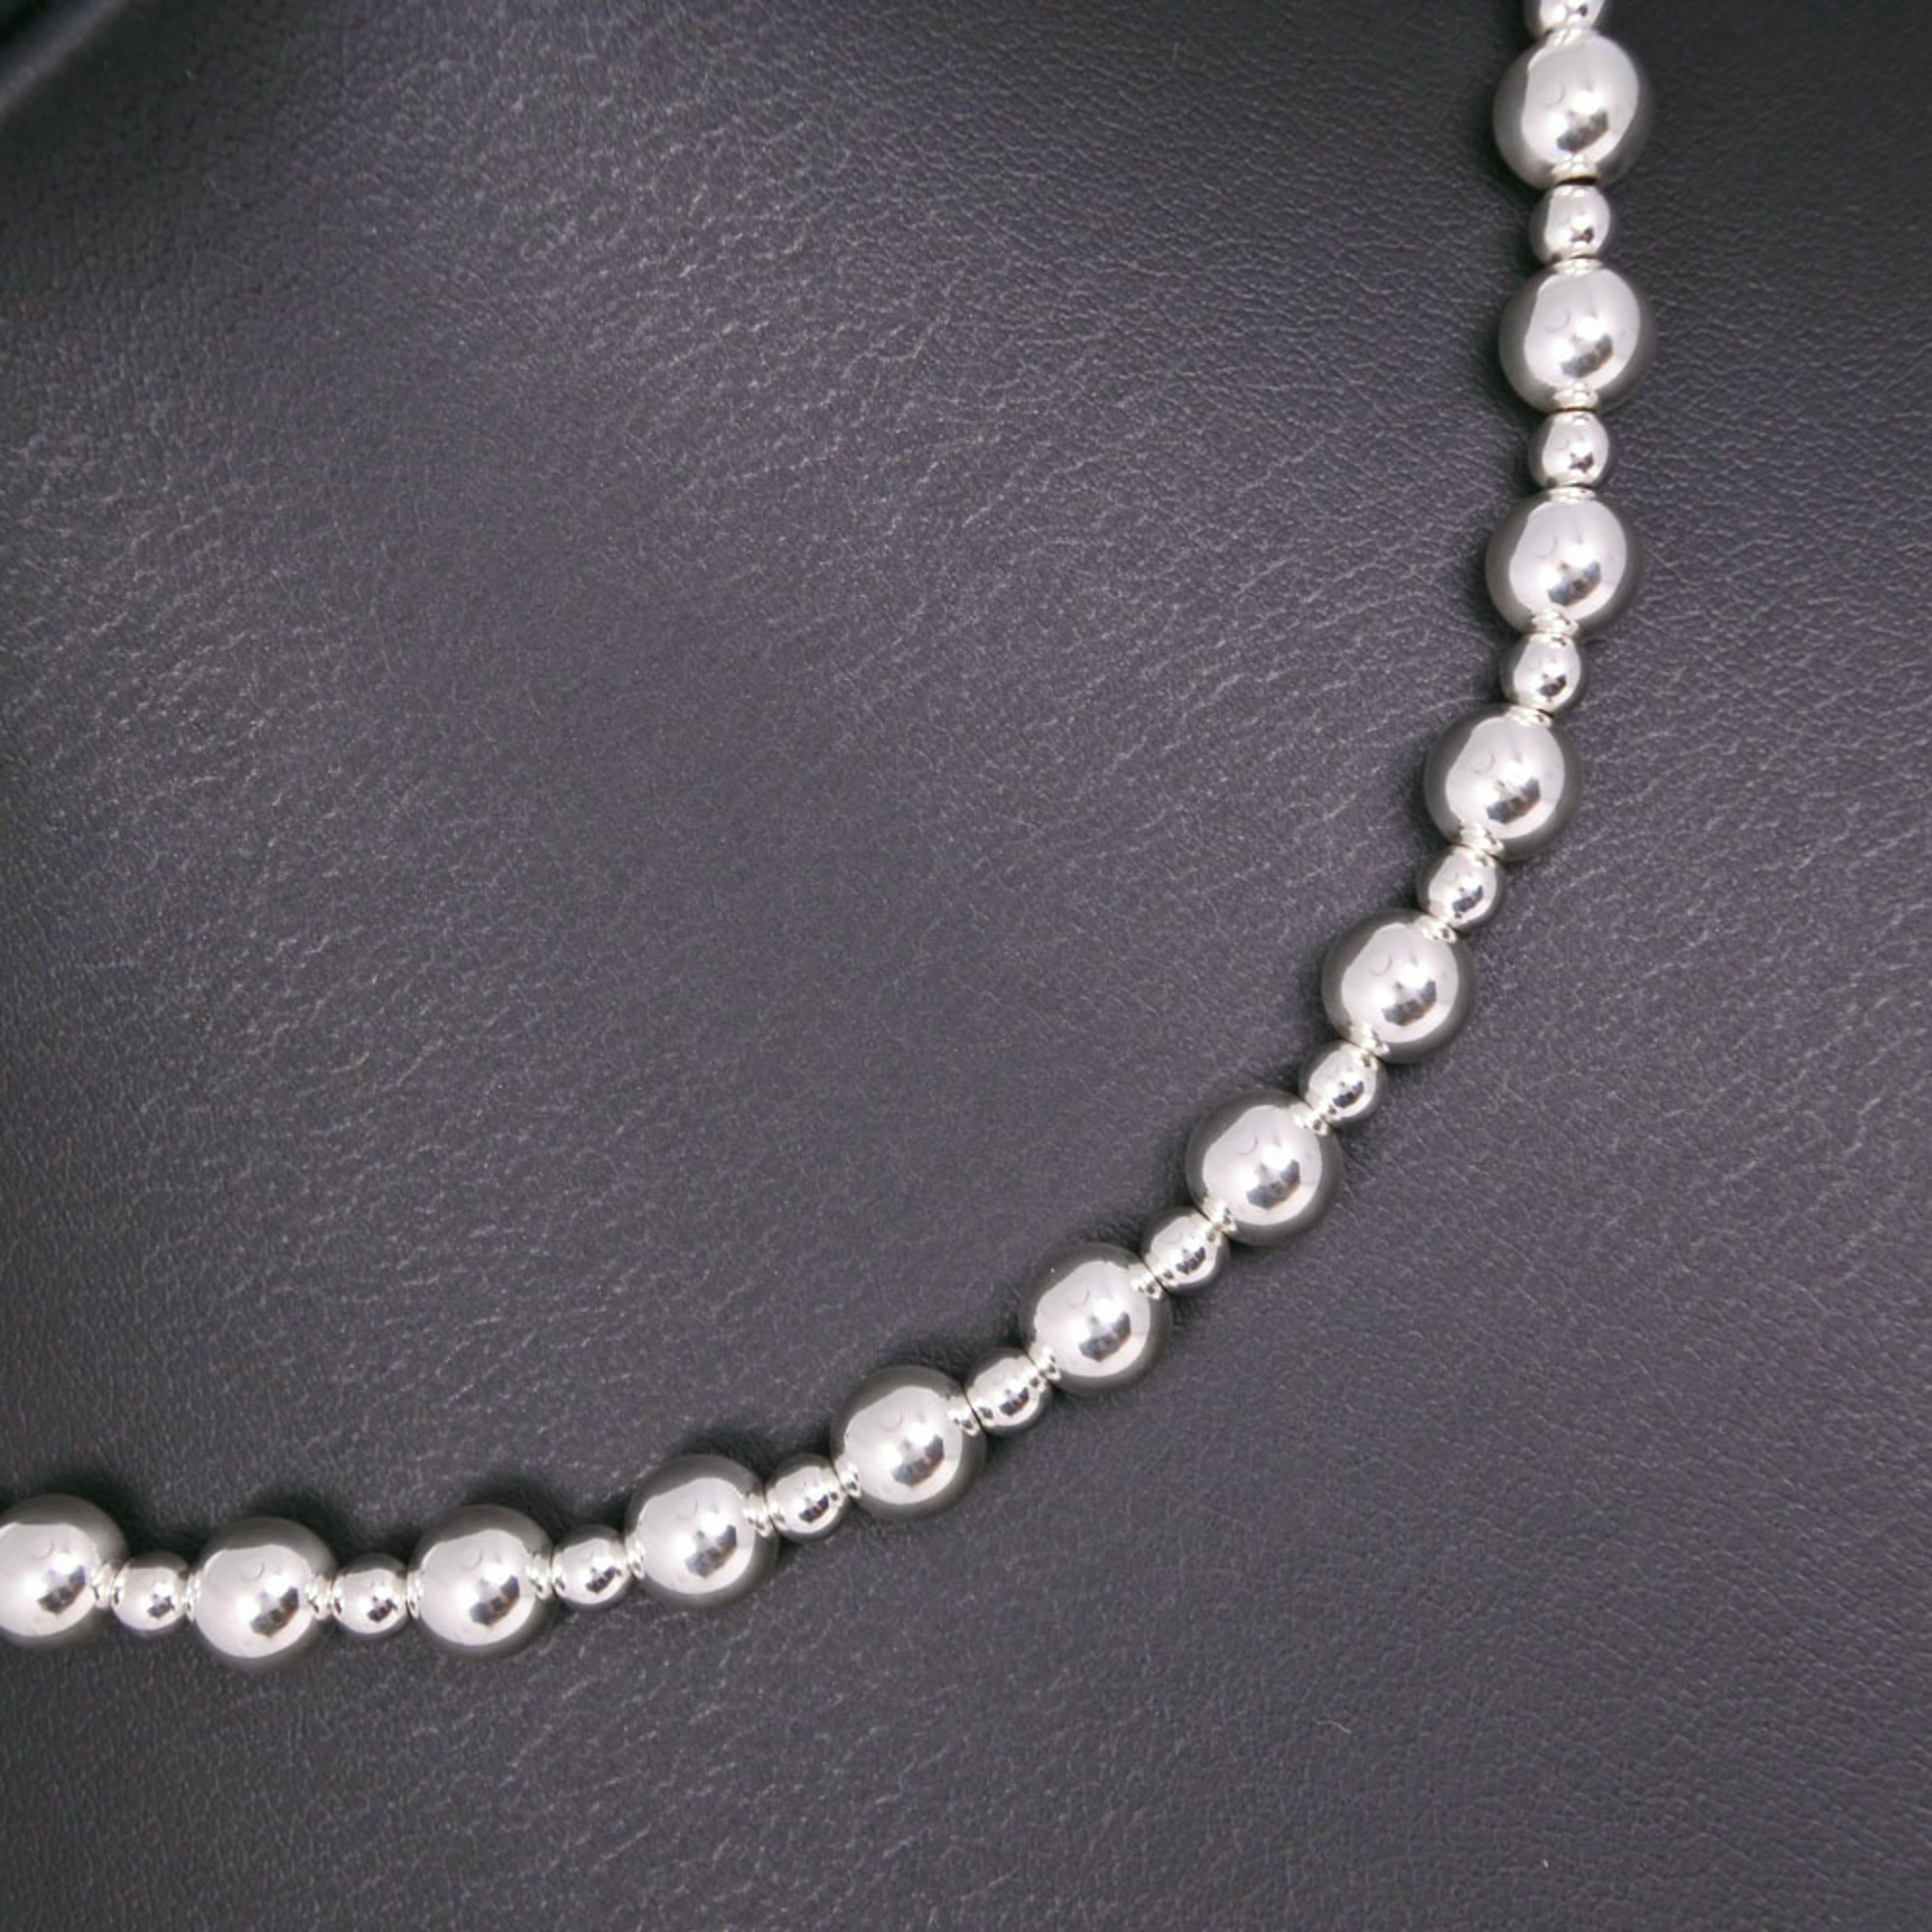 Tiffany TIFFANY&Co. Ball Necklace Vintage Silver 925 Made in the